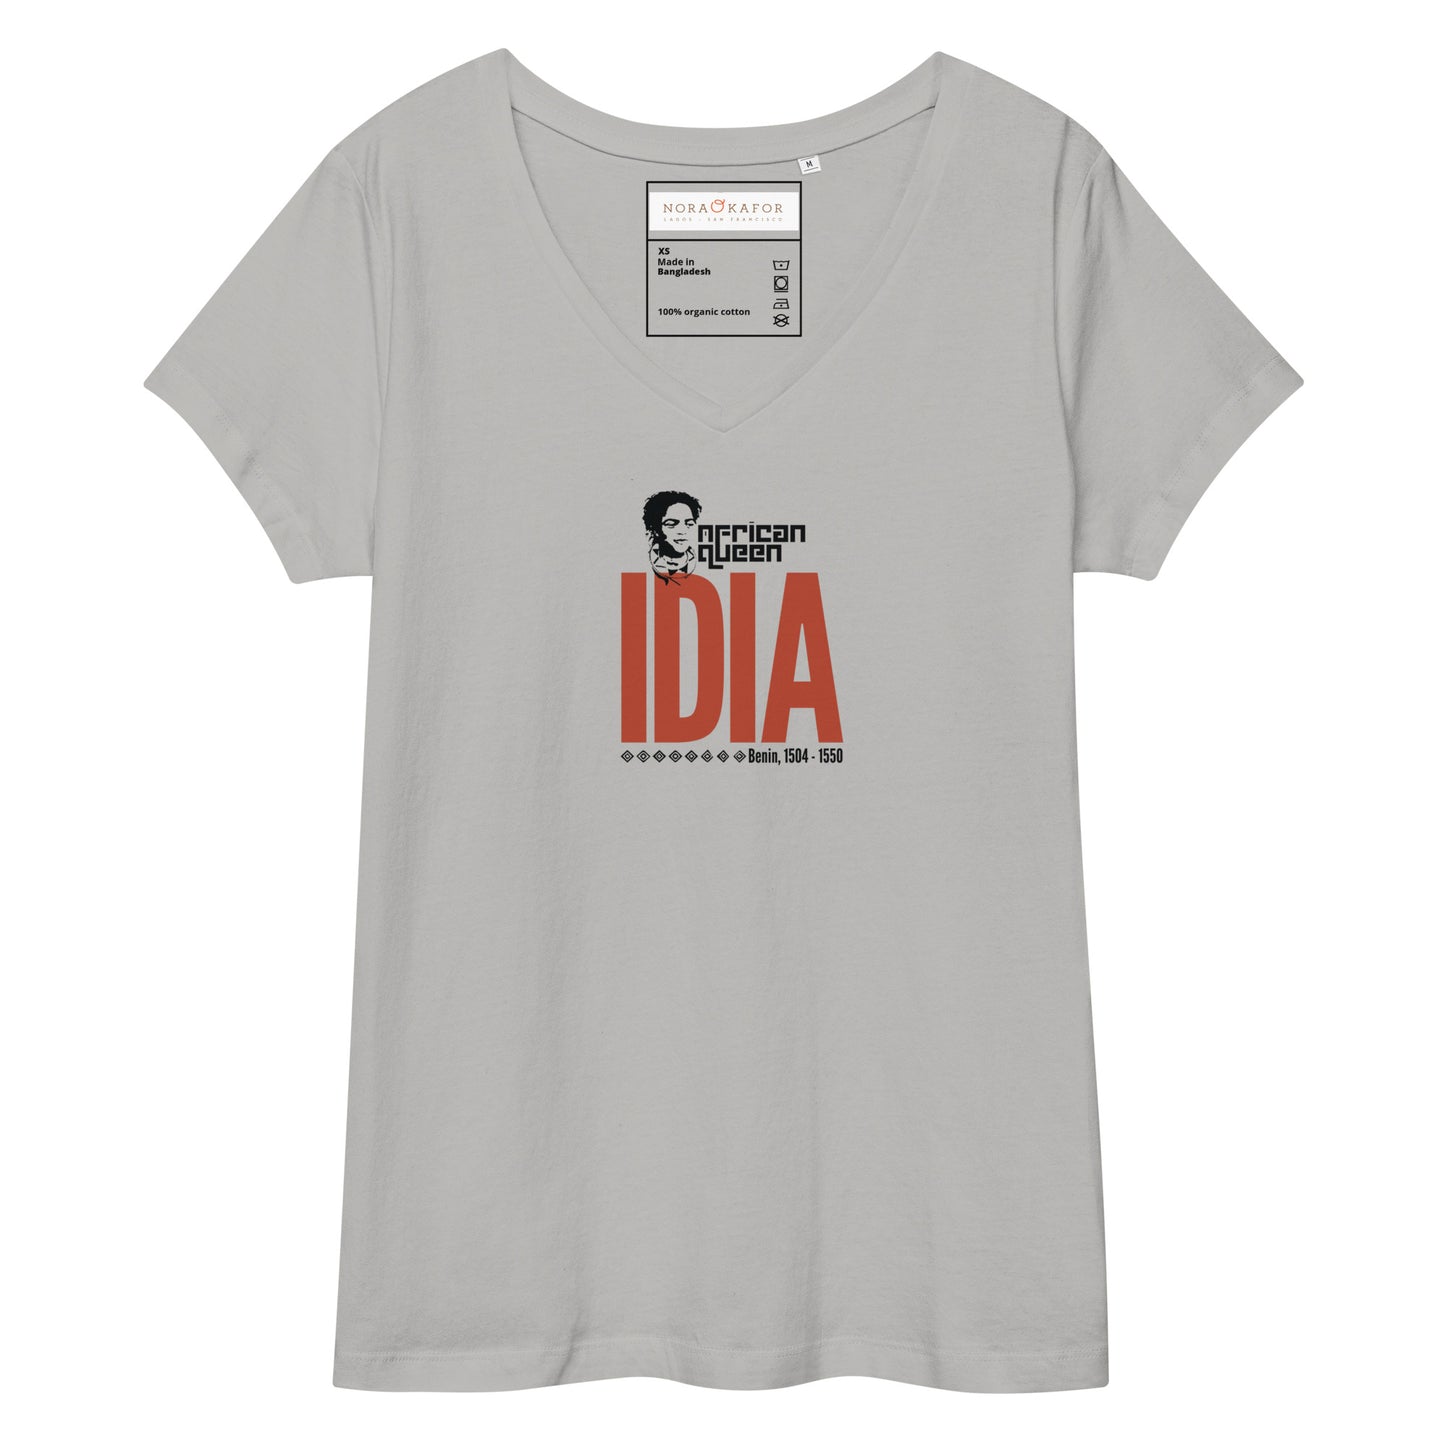 Queen Idia Women’s fitted v-neck t-shirt